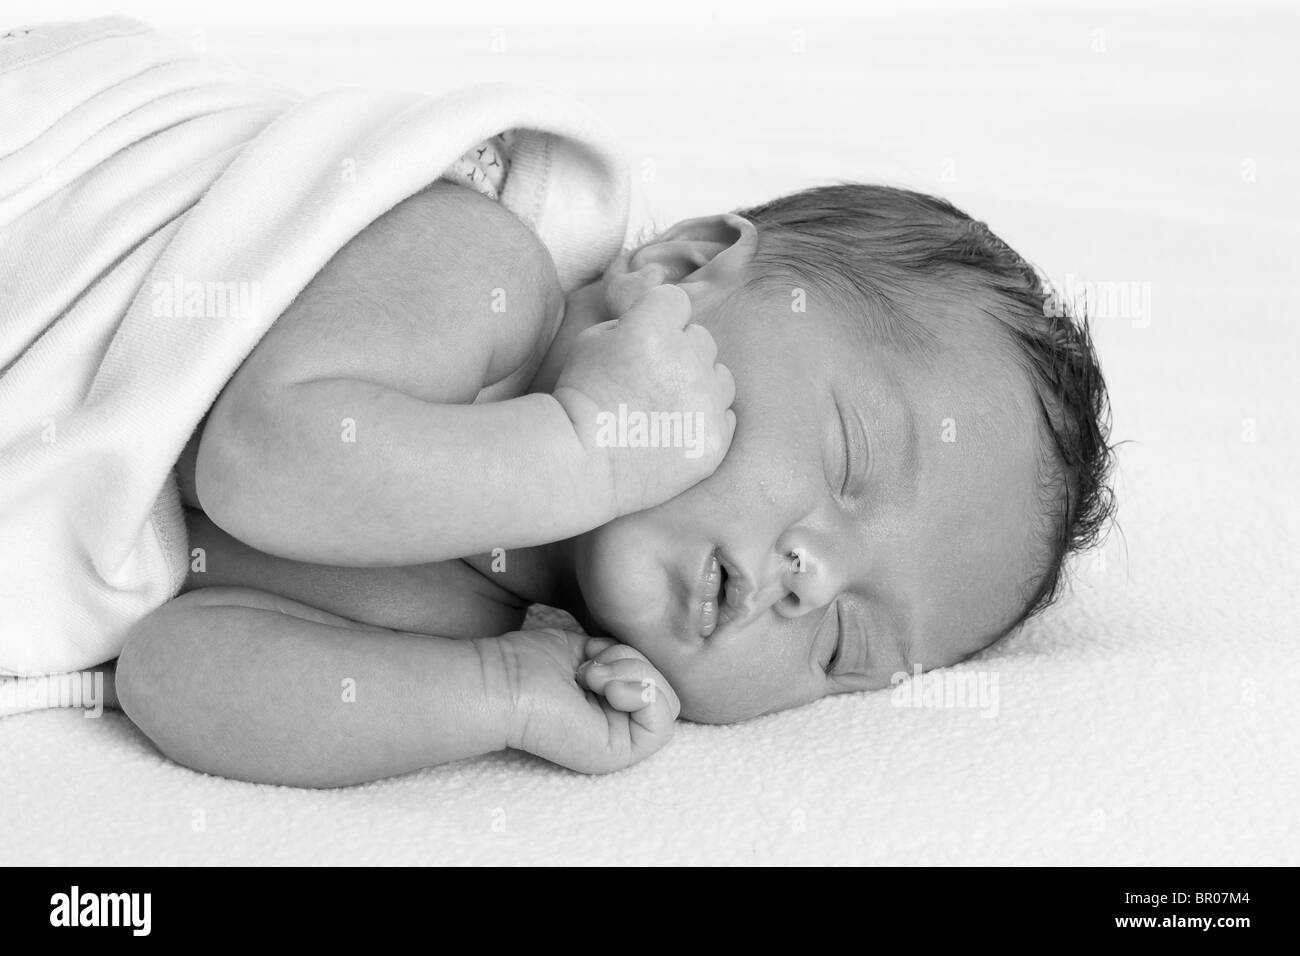 Newborn Caucasian baby rapped in a white blanket on a white background Stock Photo